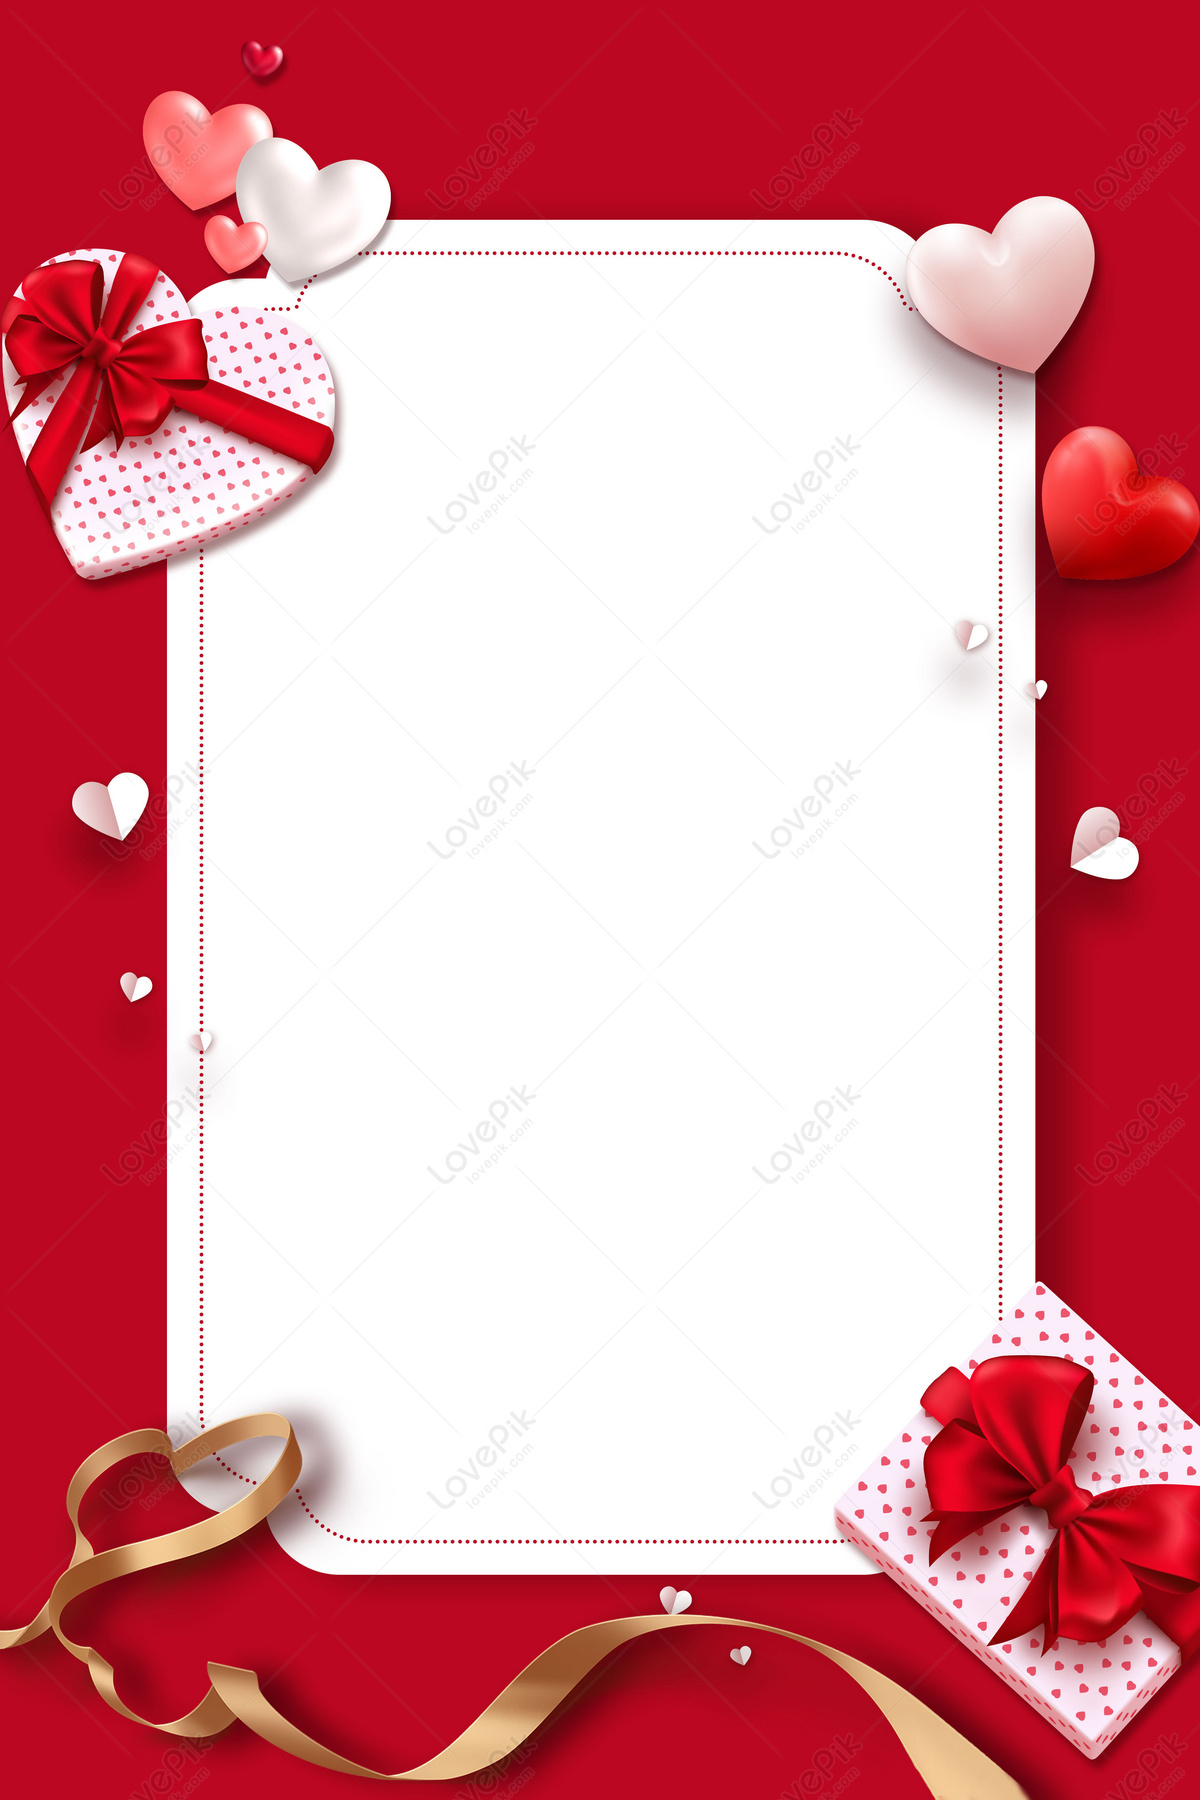 Free Christmas Background with Gift